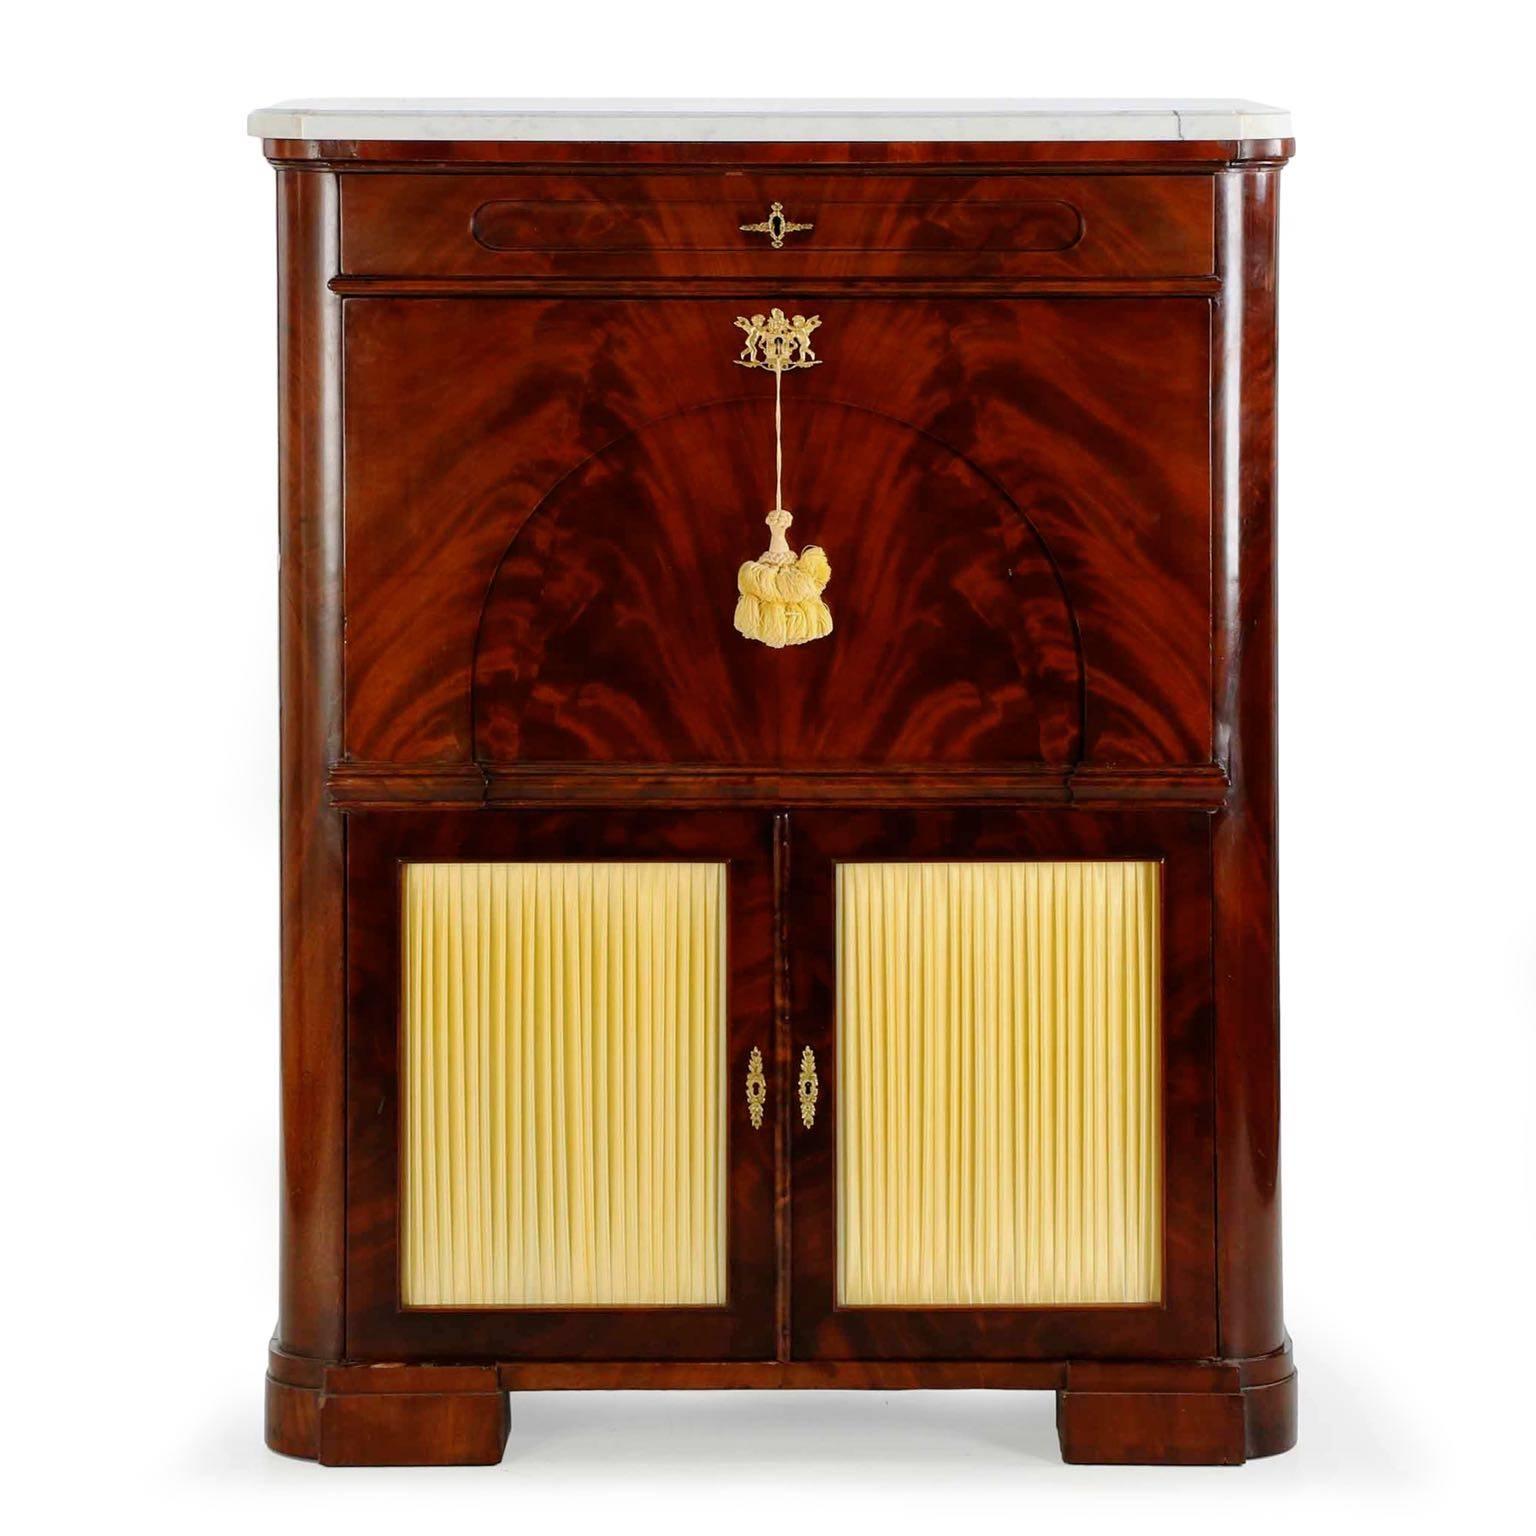 Of simply magnificent quality and craftsmanship, this exquisite secrétaire à abattant (secretary desk) is a perfect melding of rich material and precise design. The careful attention to detail is first evident when opening the fall front lid, this